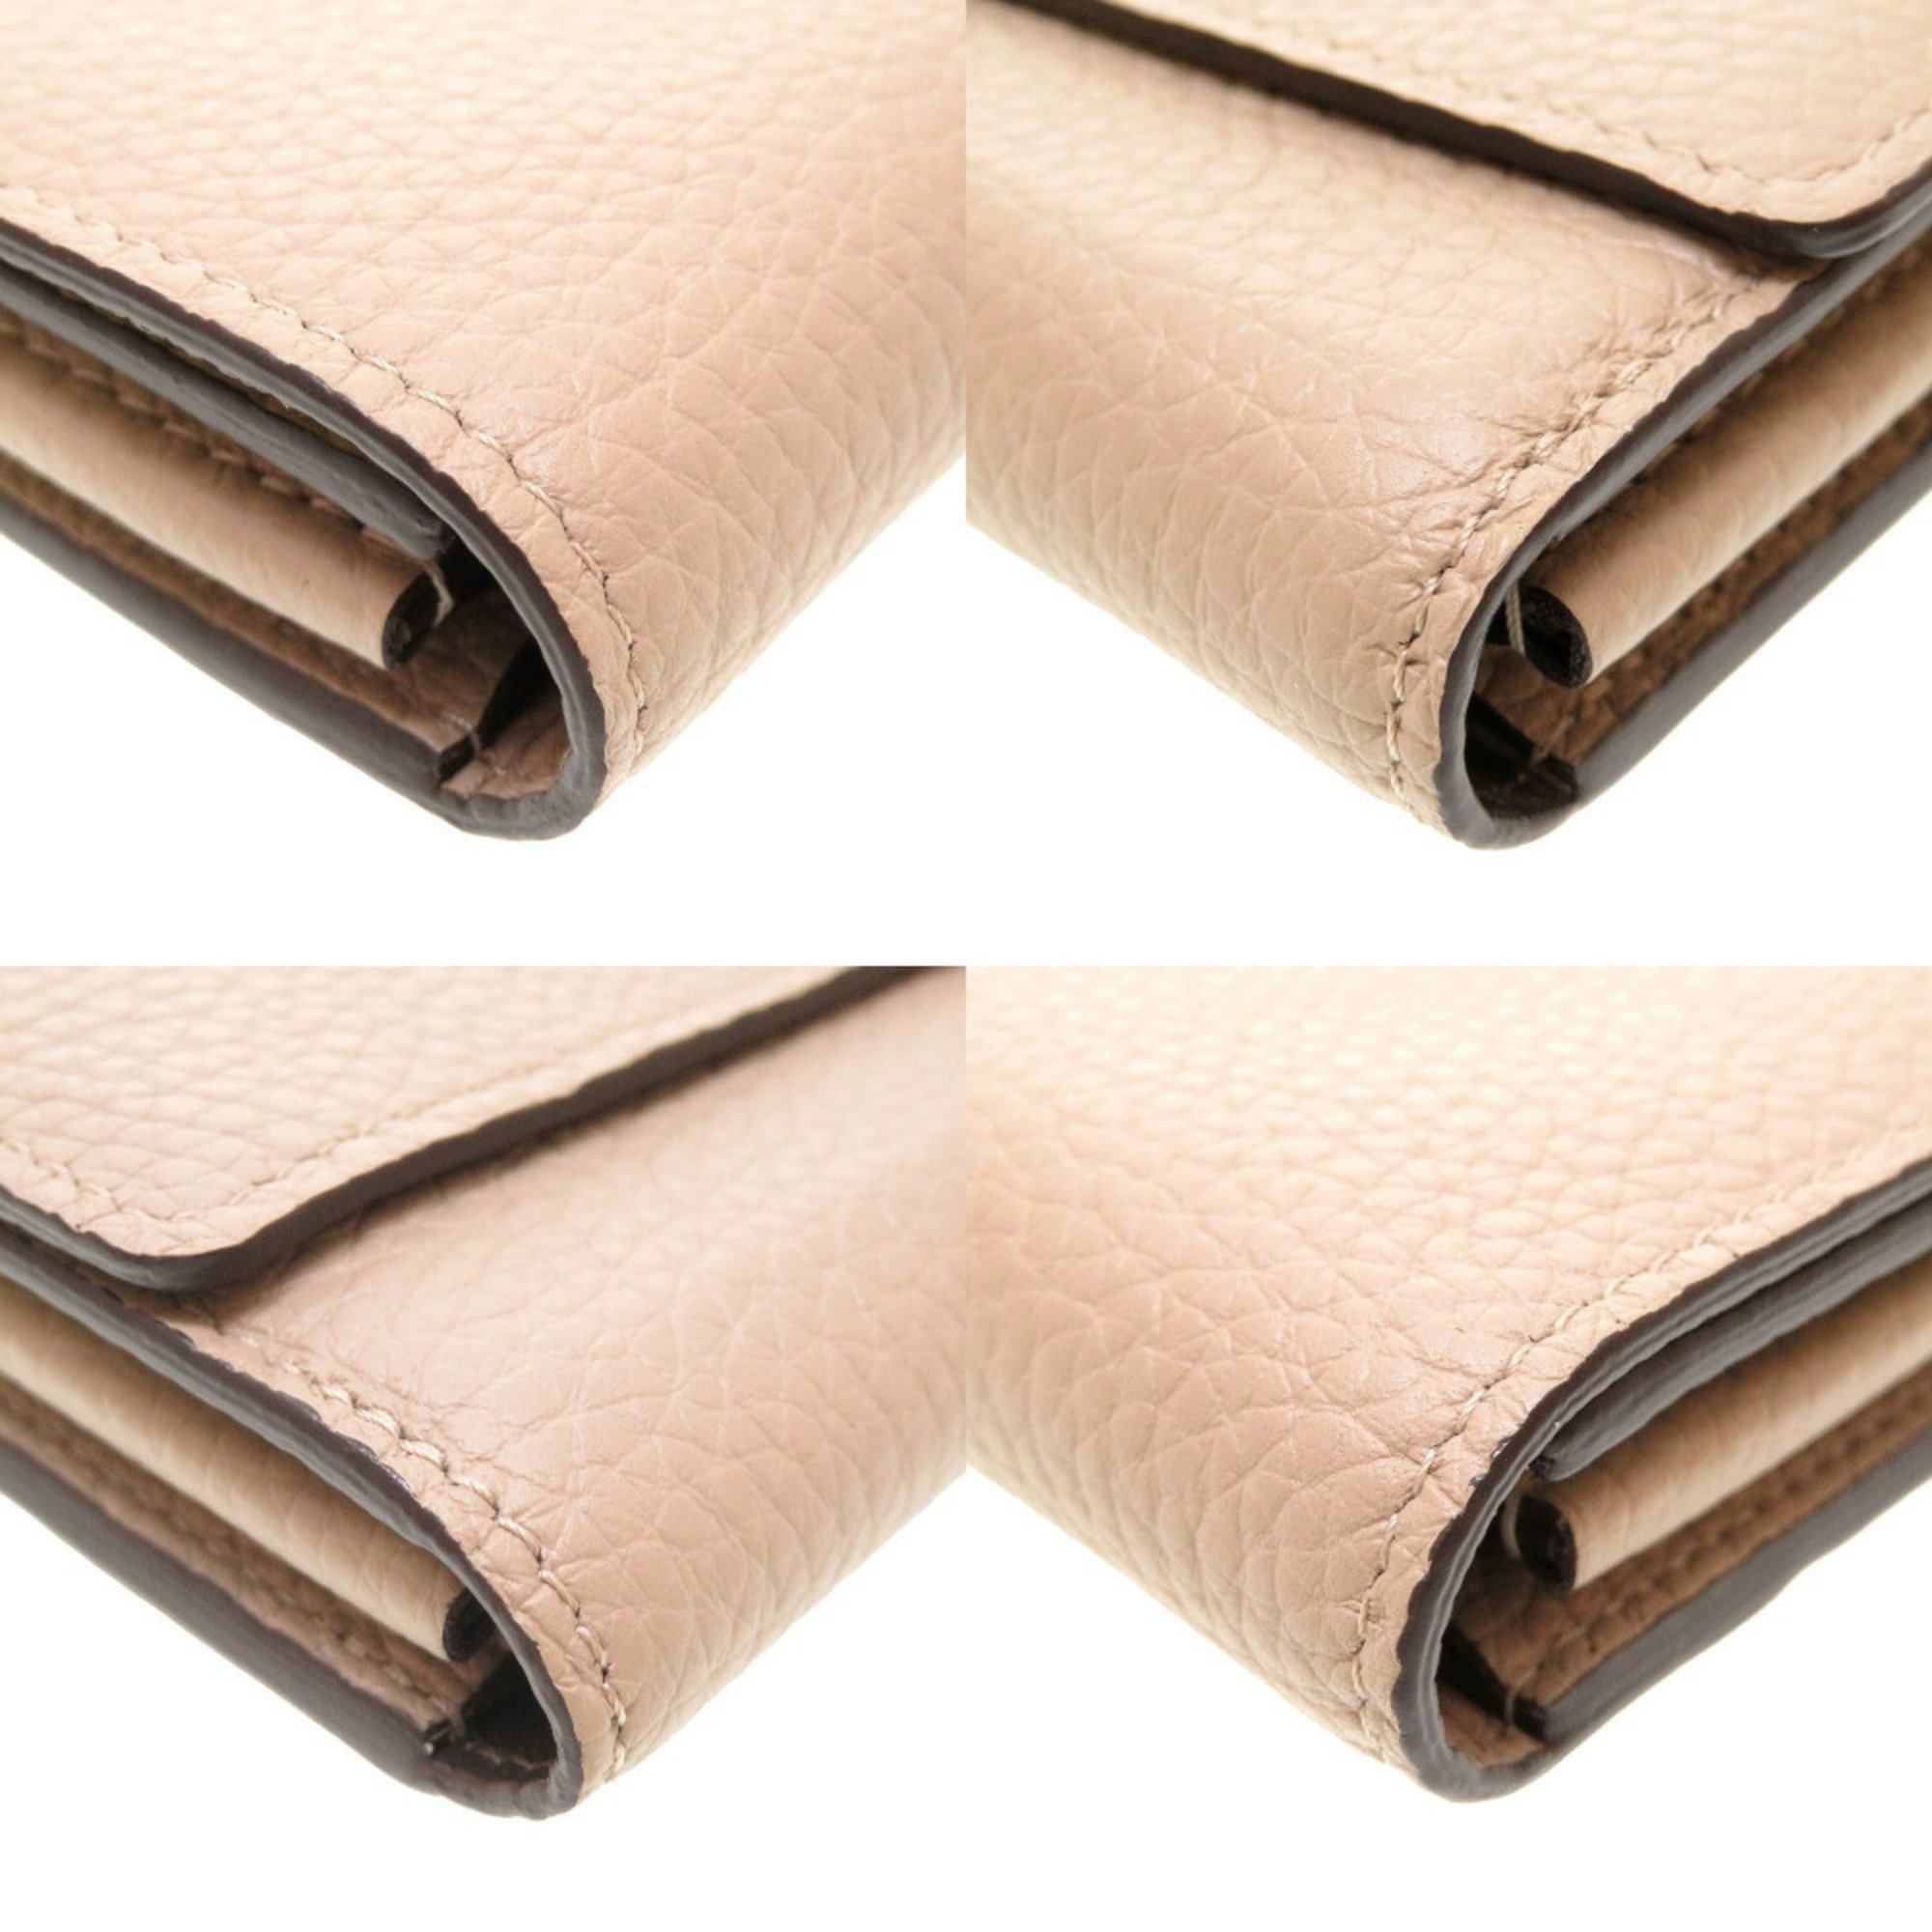 Louis Vuitton Portefeuil Capucines Taurillon Leather Galle M61249 IC Tag Long Wallet Beige